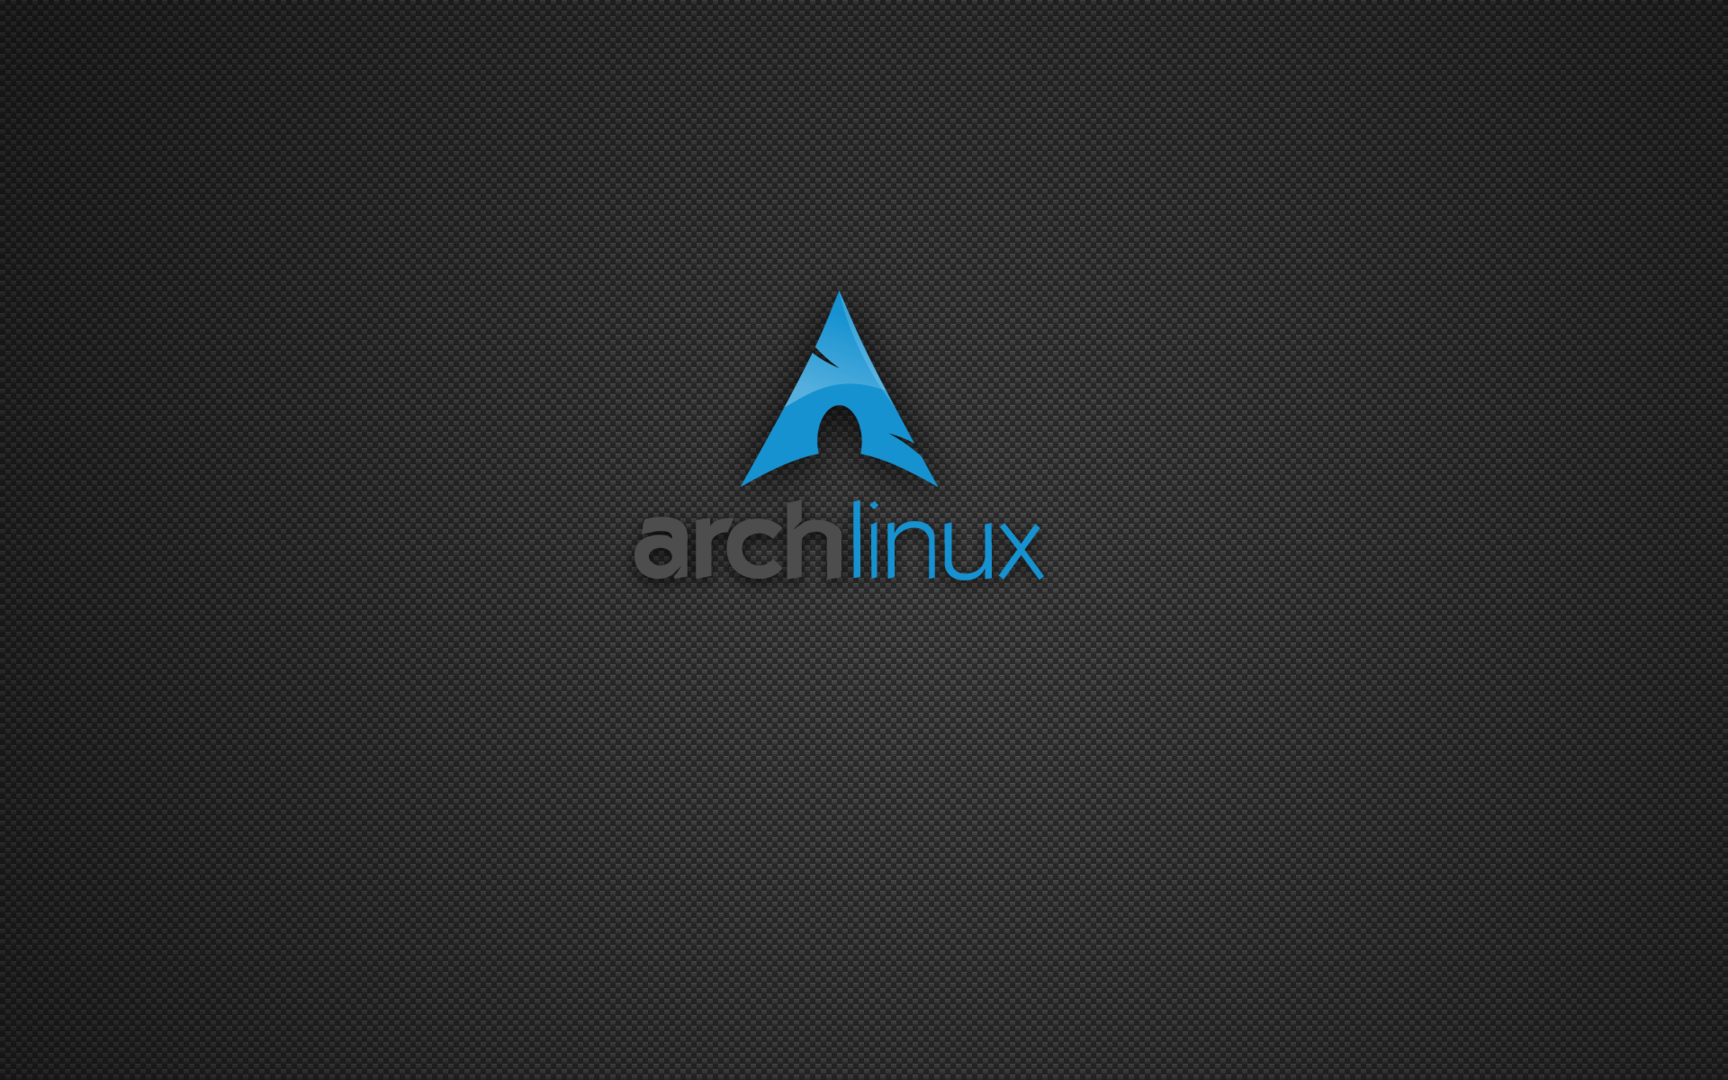 Arch Linux wallpaper 15408